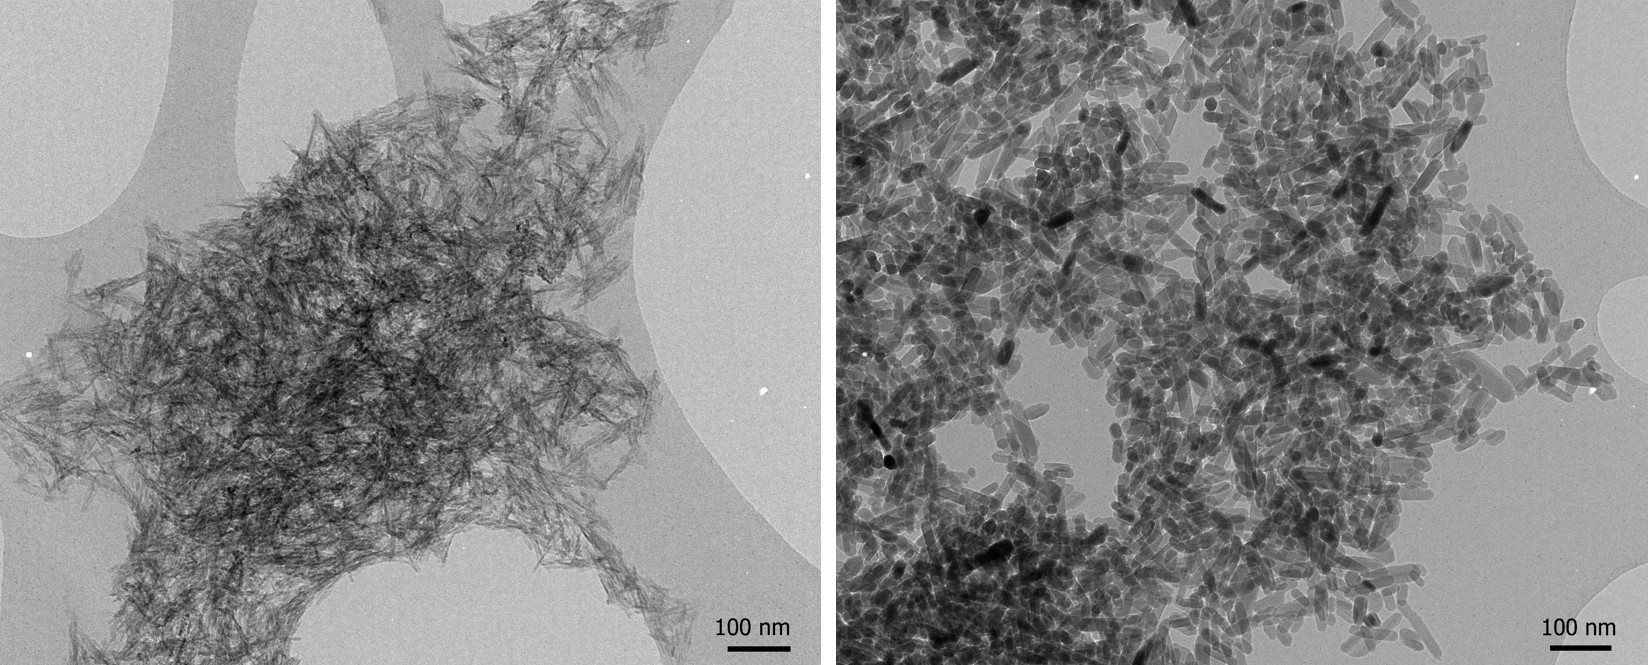 Calcium phosphate wet precipitate before (left) and after (right) autoclave treatment (Karin Müller, CAIC, doi.org/10.1016/j.biomaterials.2013.10.041).